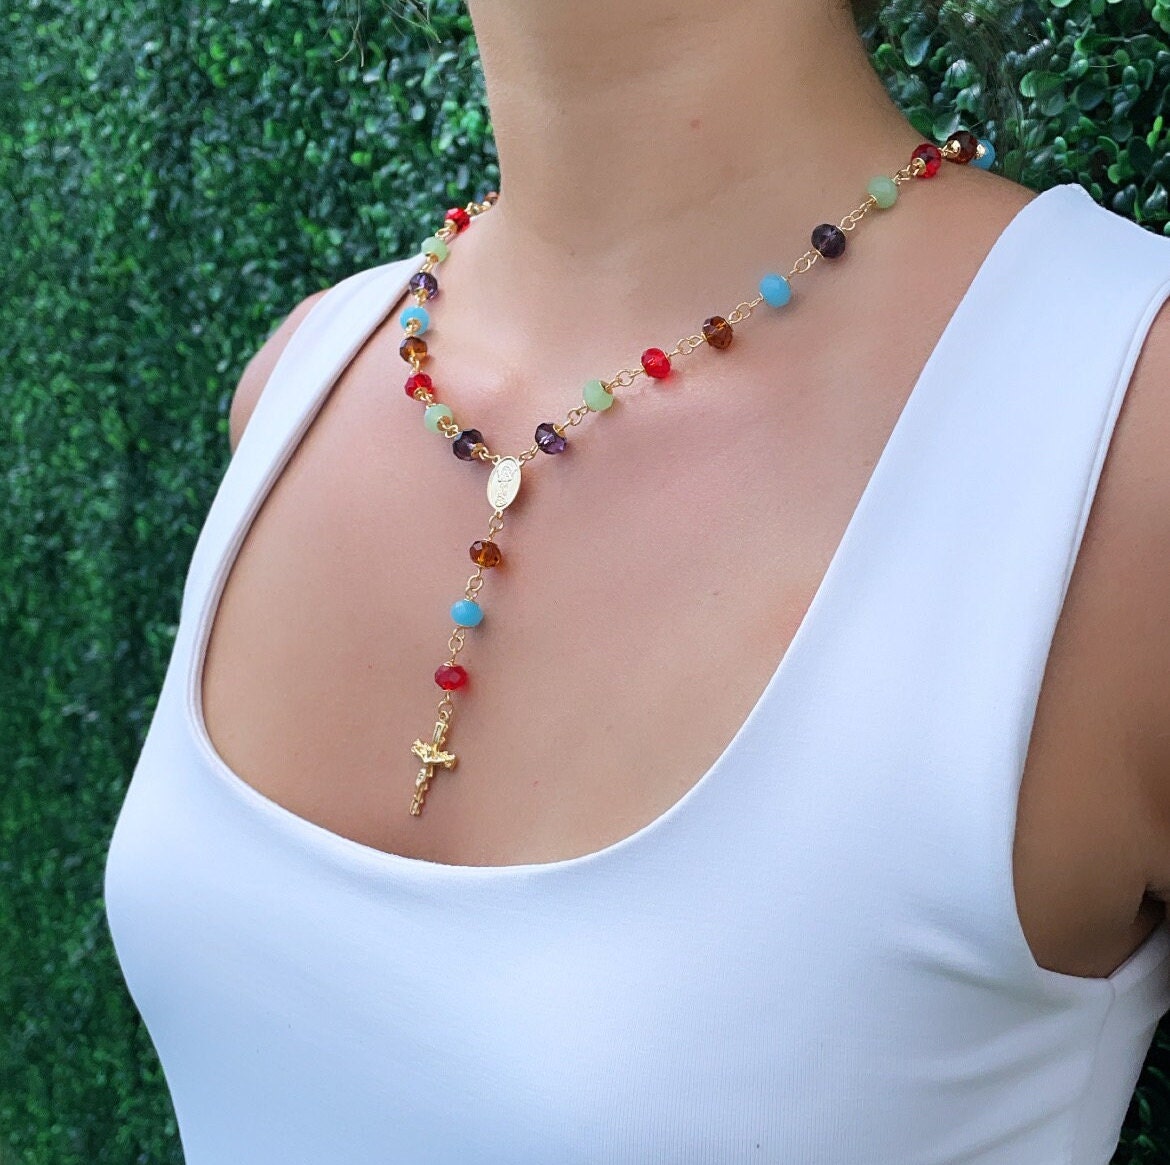 18k Gold Layered Colorful Glass Ball Rosary Necklace with Baby Jesus and Cross,